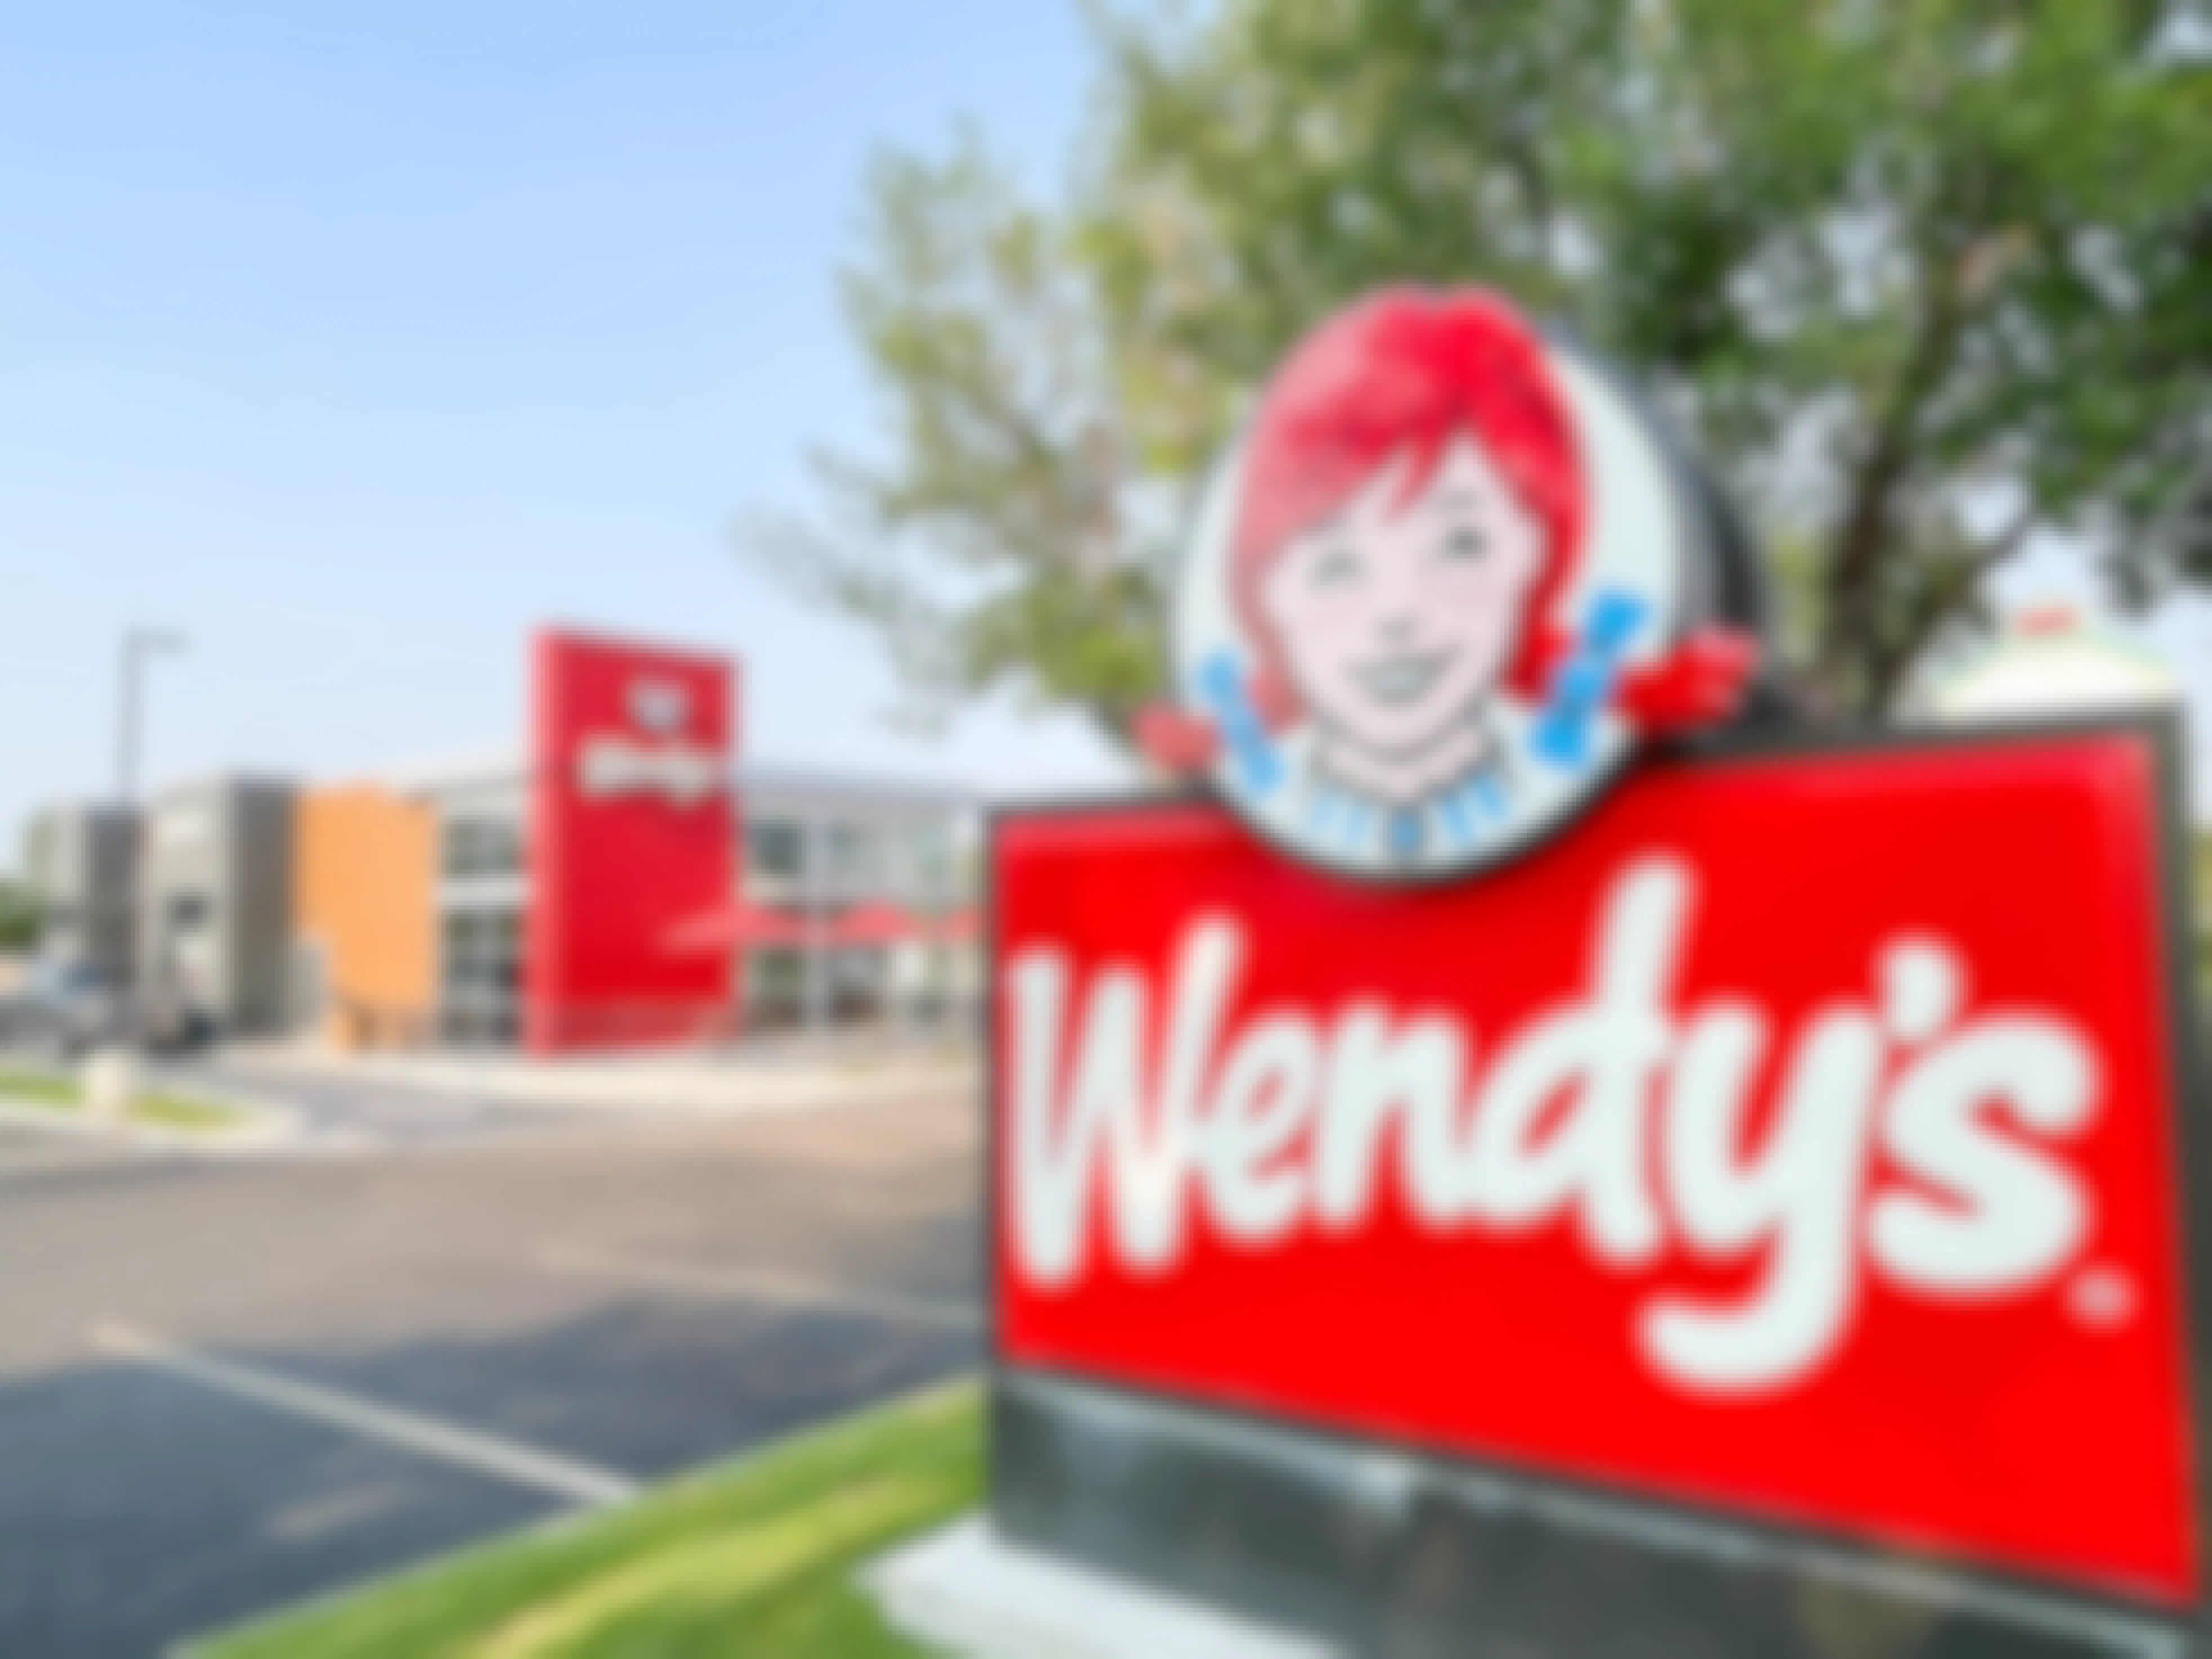 wendys store sign